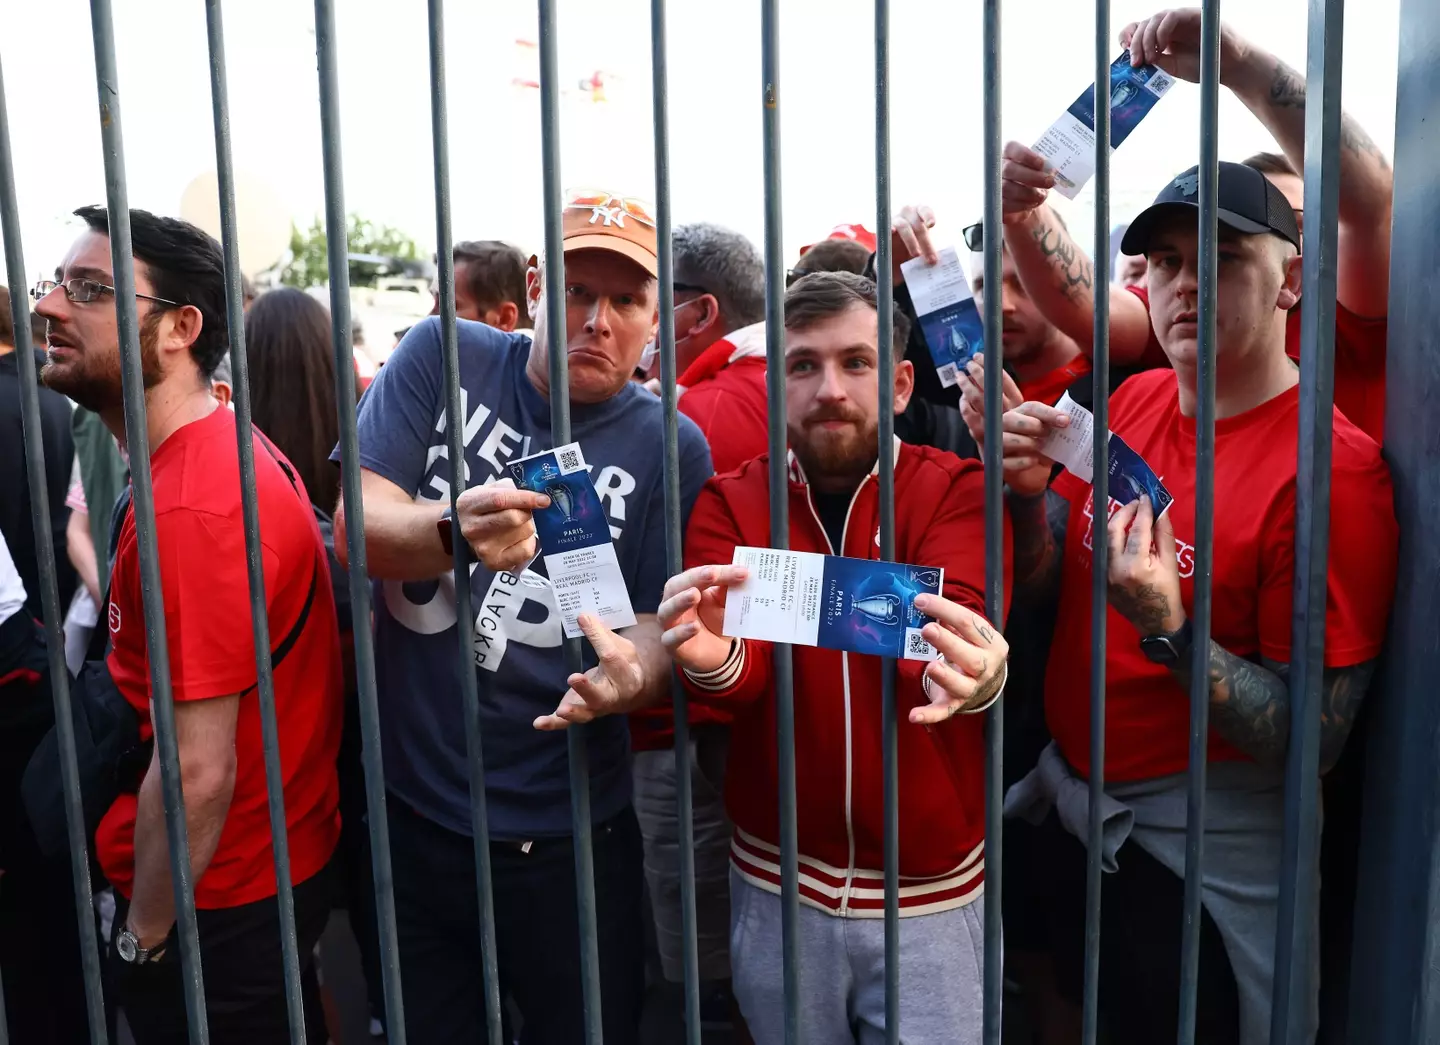 Many of the fans stuck outside claimed to have tickets.